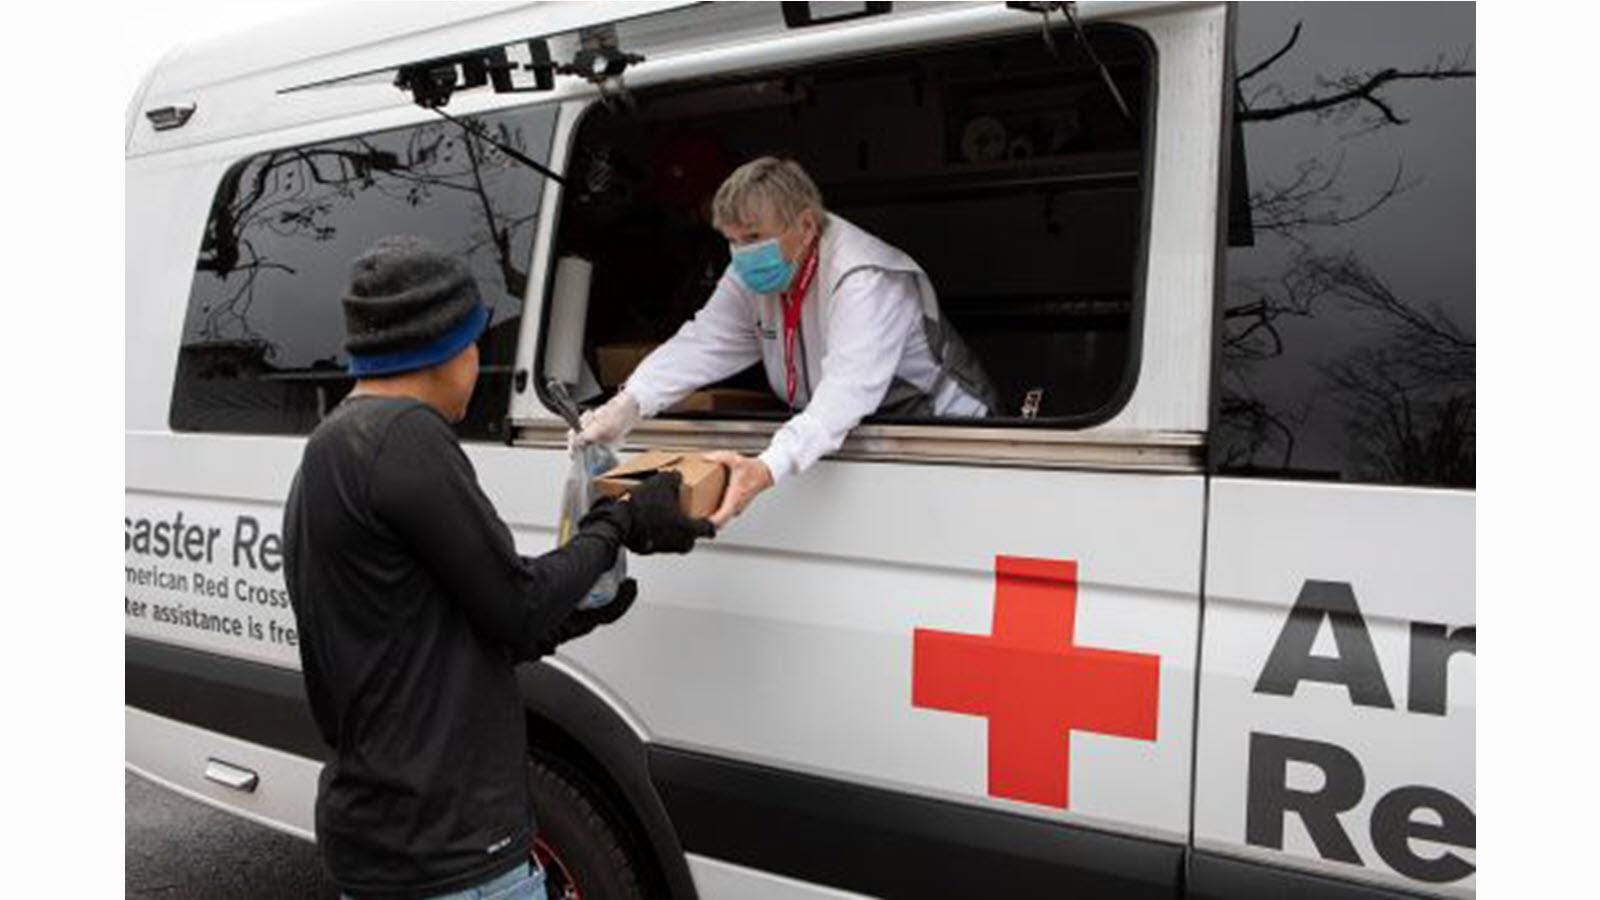 Red Cross worker hands a boxed meal to a disaster victim.